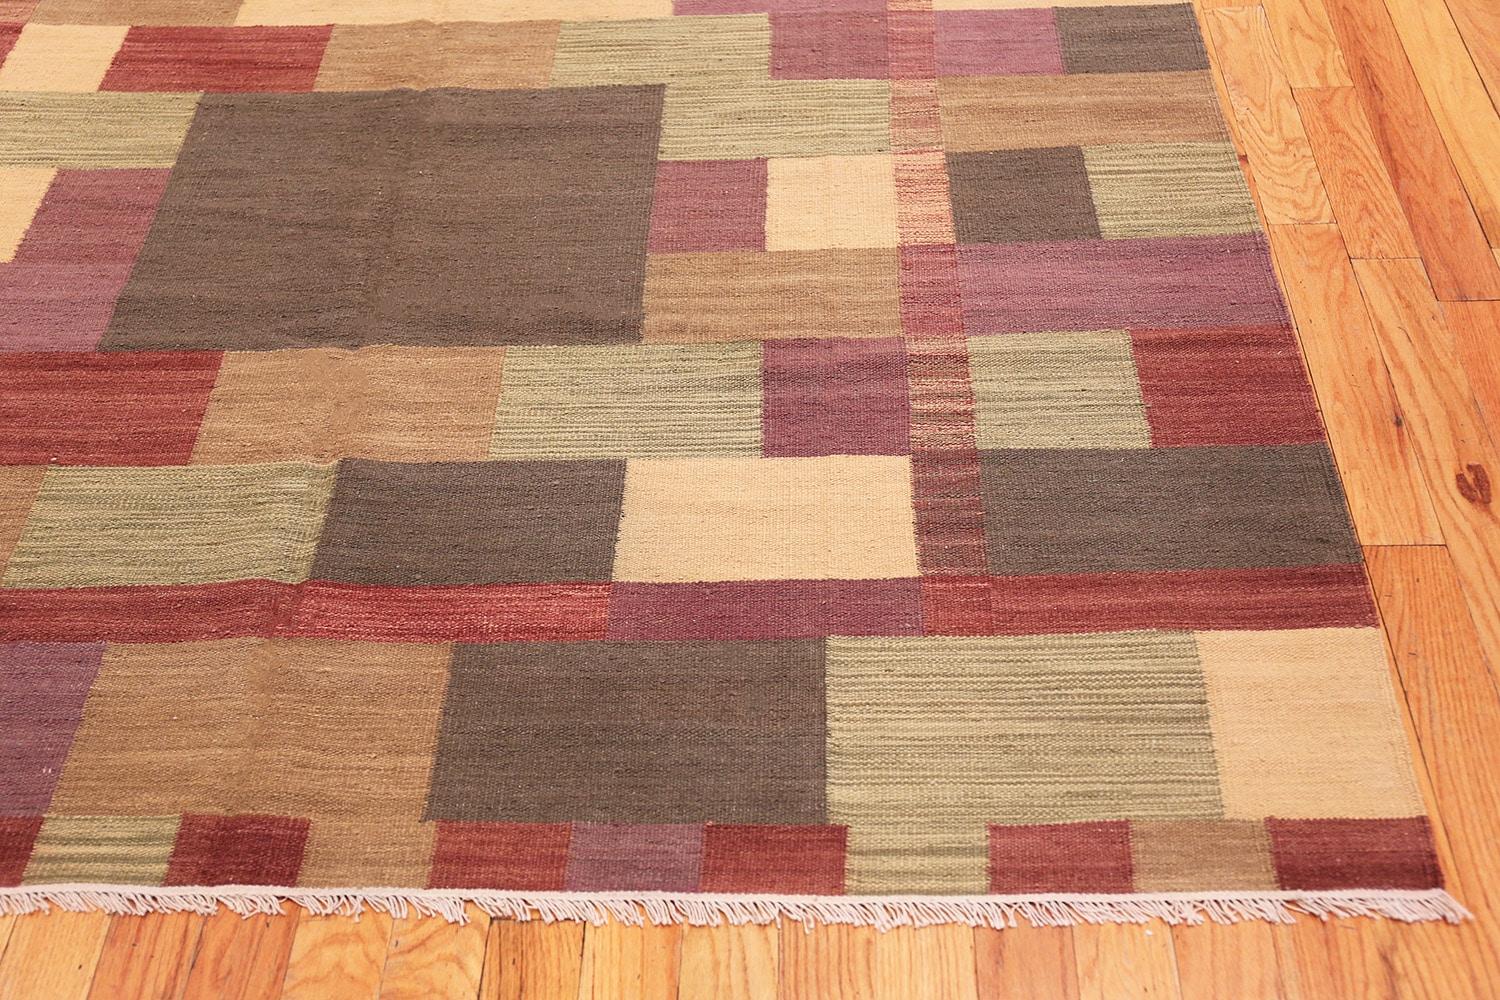 Indian Swedish Inspired Modern Kilim Rug. Size: 7 ft x 9 ft 2 in (2.13 m x 2.79 m)